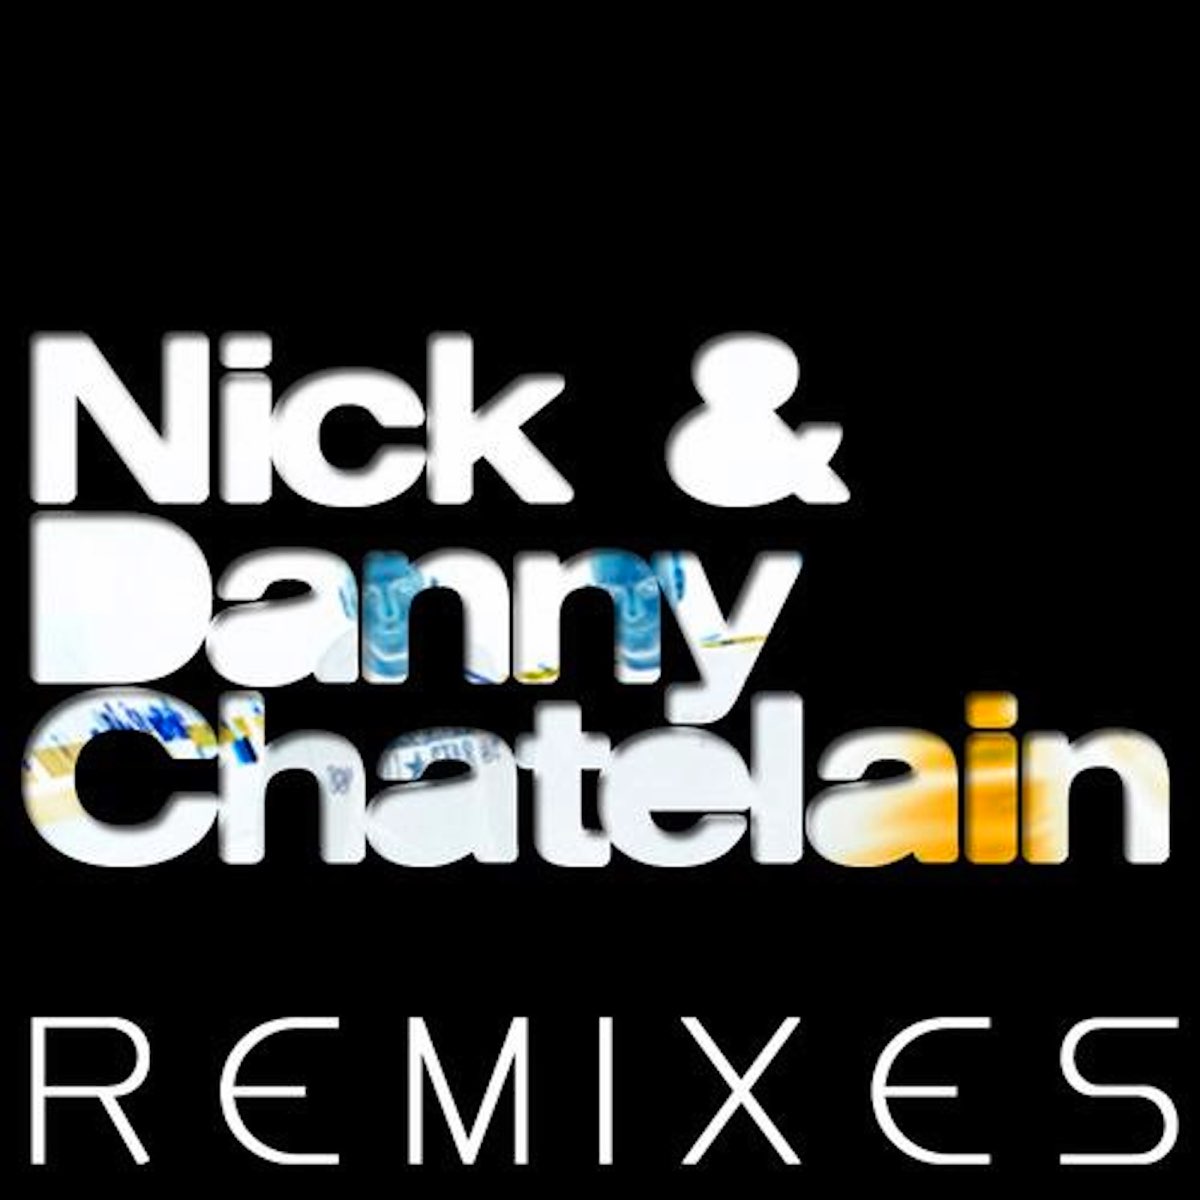 Nickanny записи. Nick and Danny Chatelain - por eso (d-formation Remix).